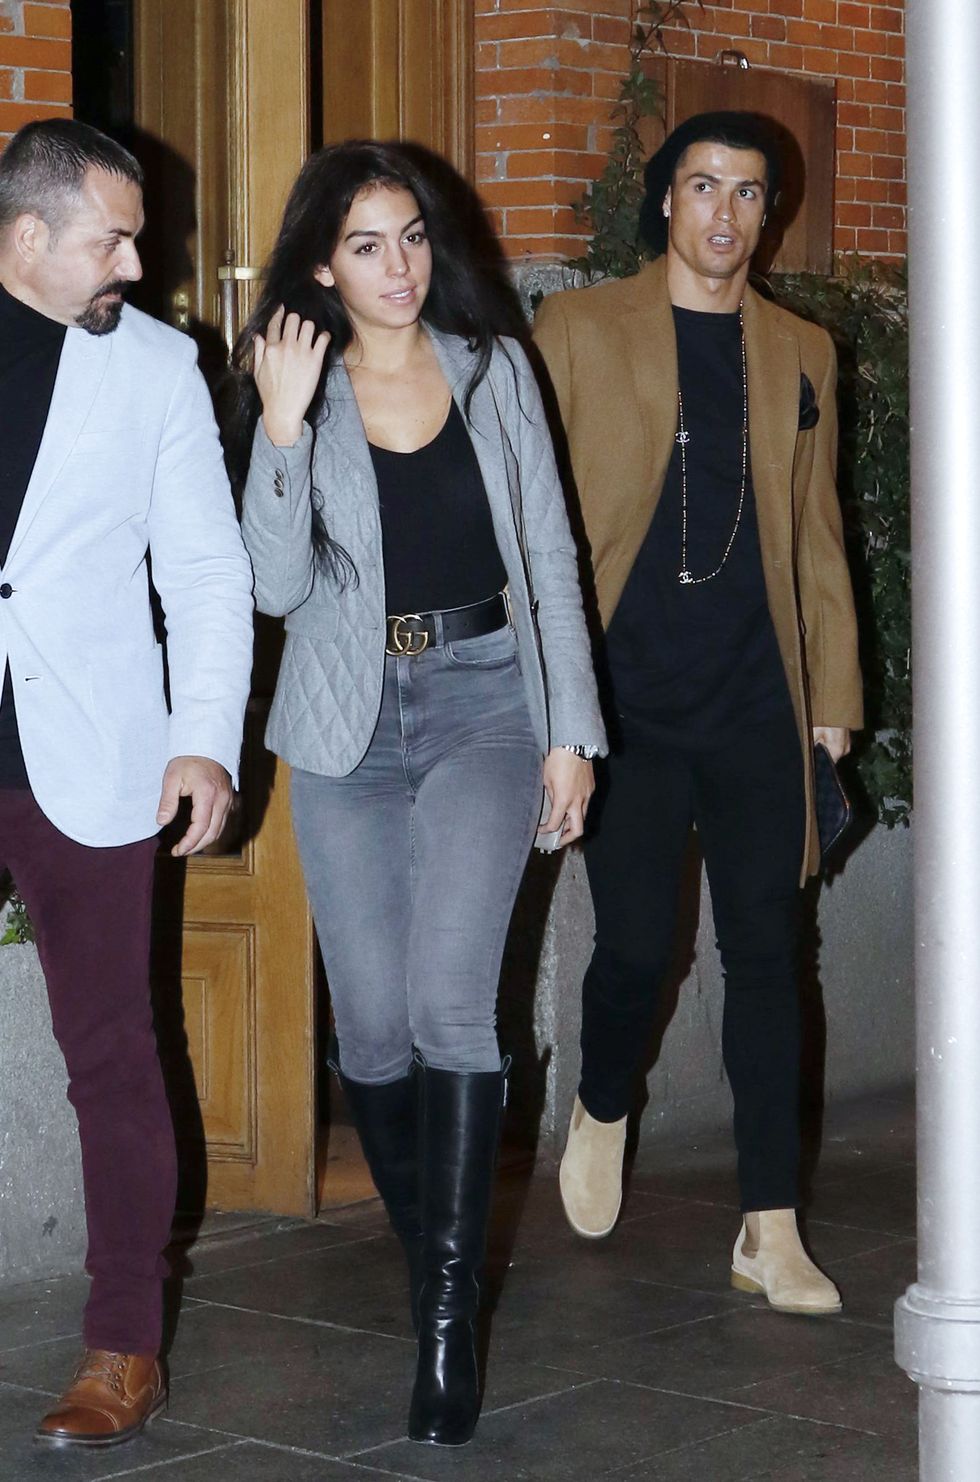 Real Madrid football player Cristiano Ronaldo and his girlfriend Georgina Rodriguez are seen leaving a restaurant on January 30, 2017 in Madrid, Spain.